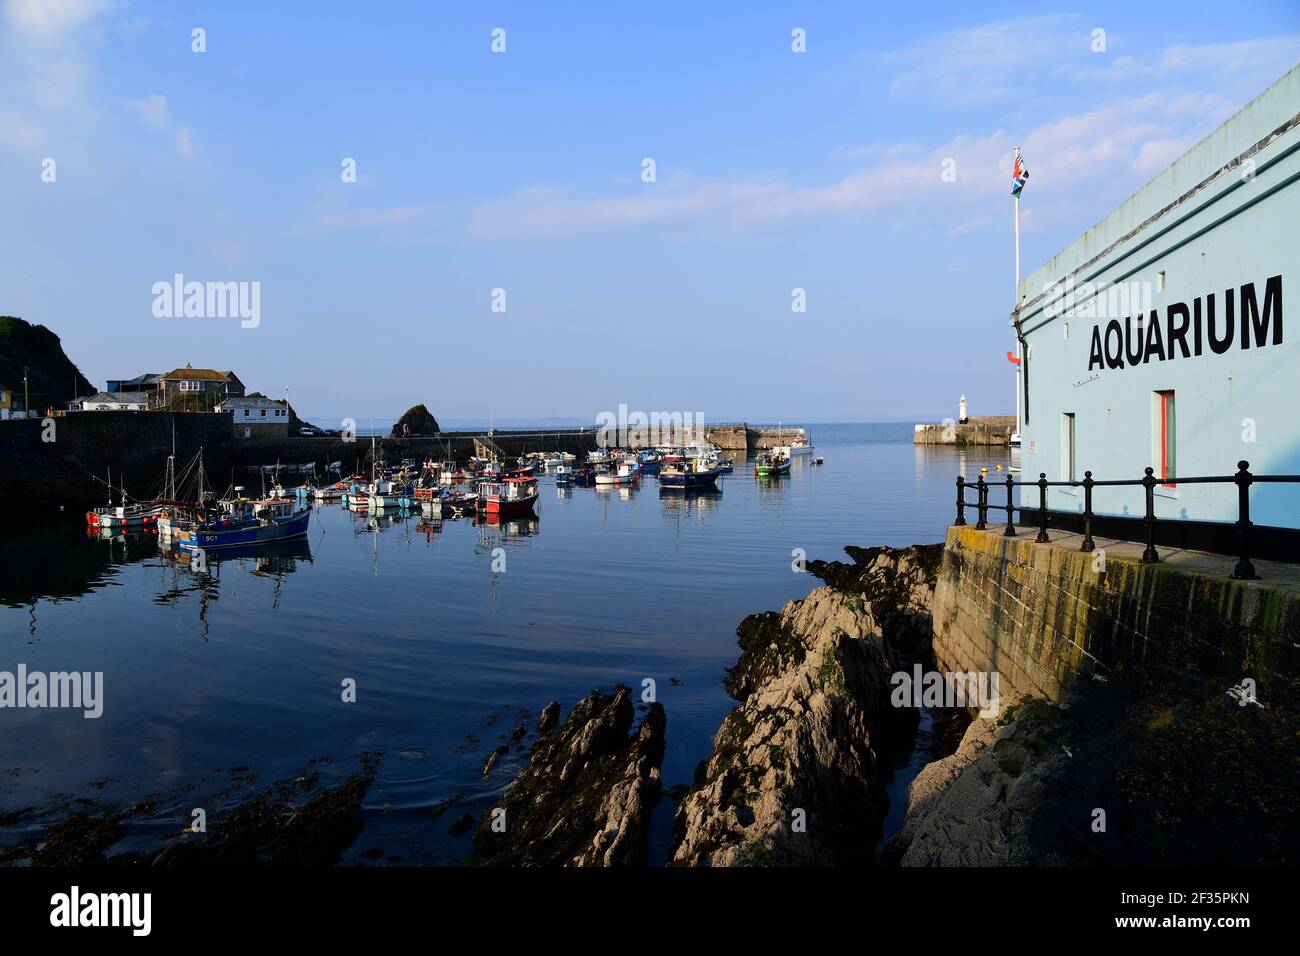 The view from Mevagissey out towards the harbour with the Aquarium in the foreground Stock Photo